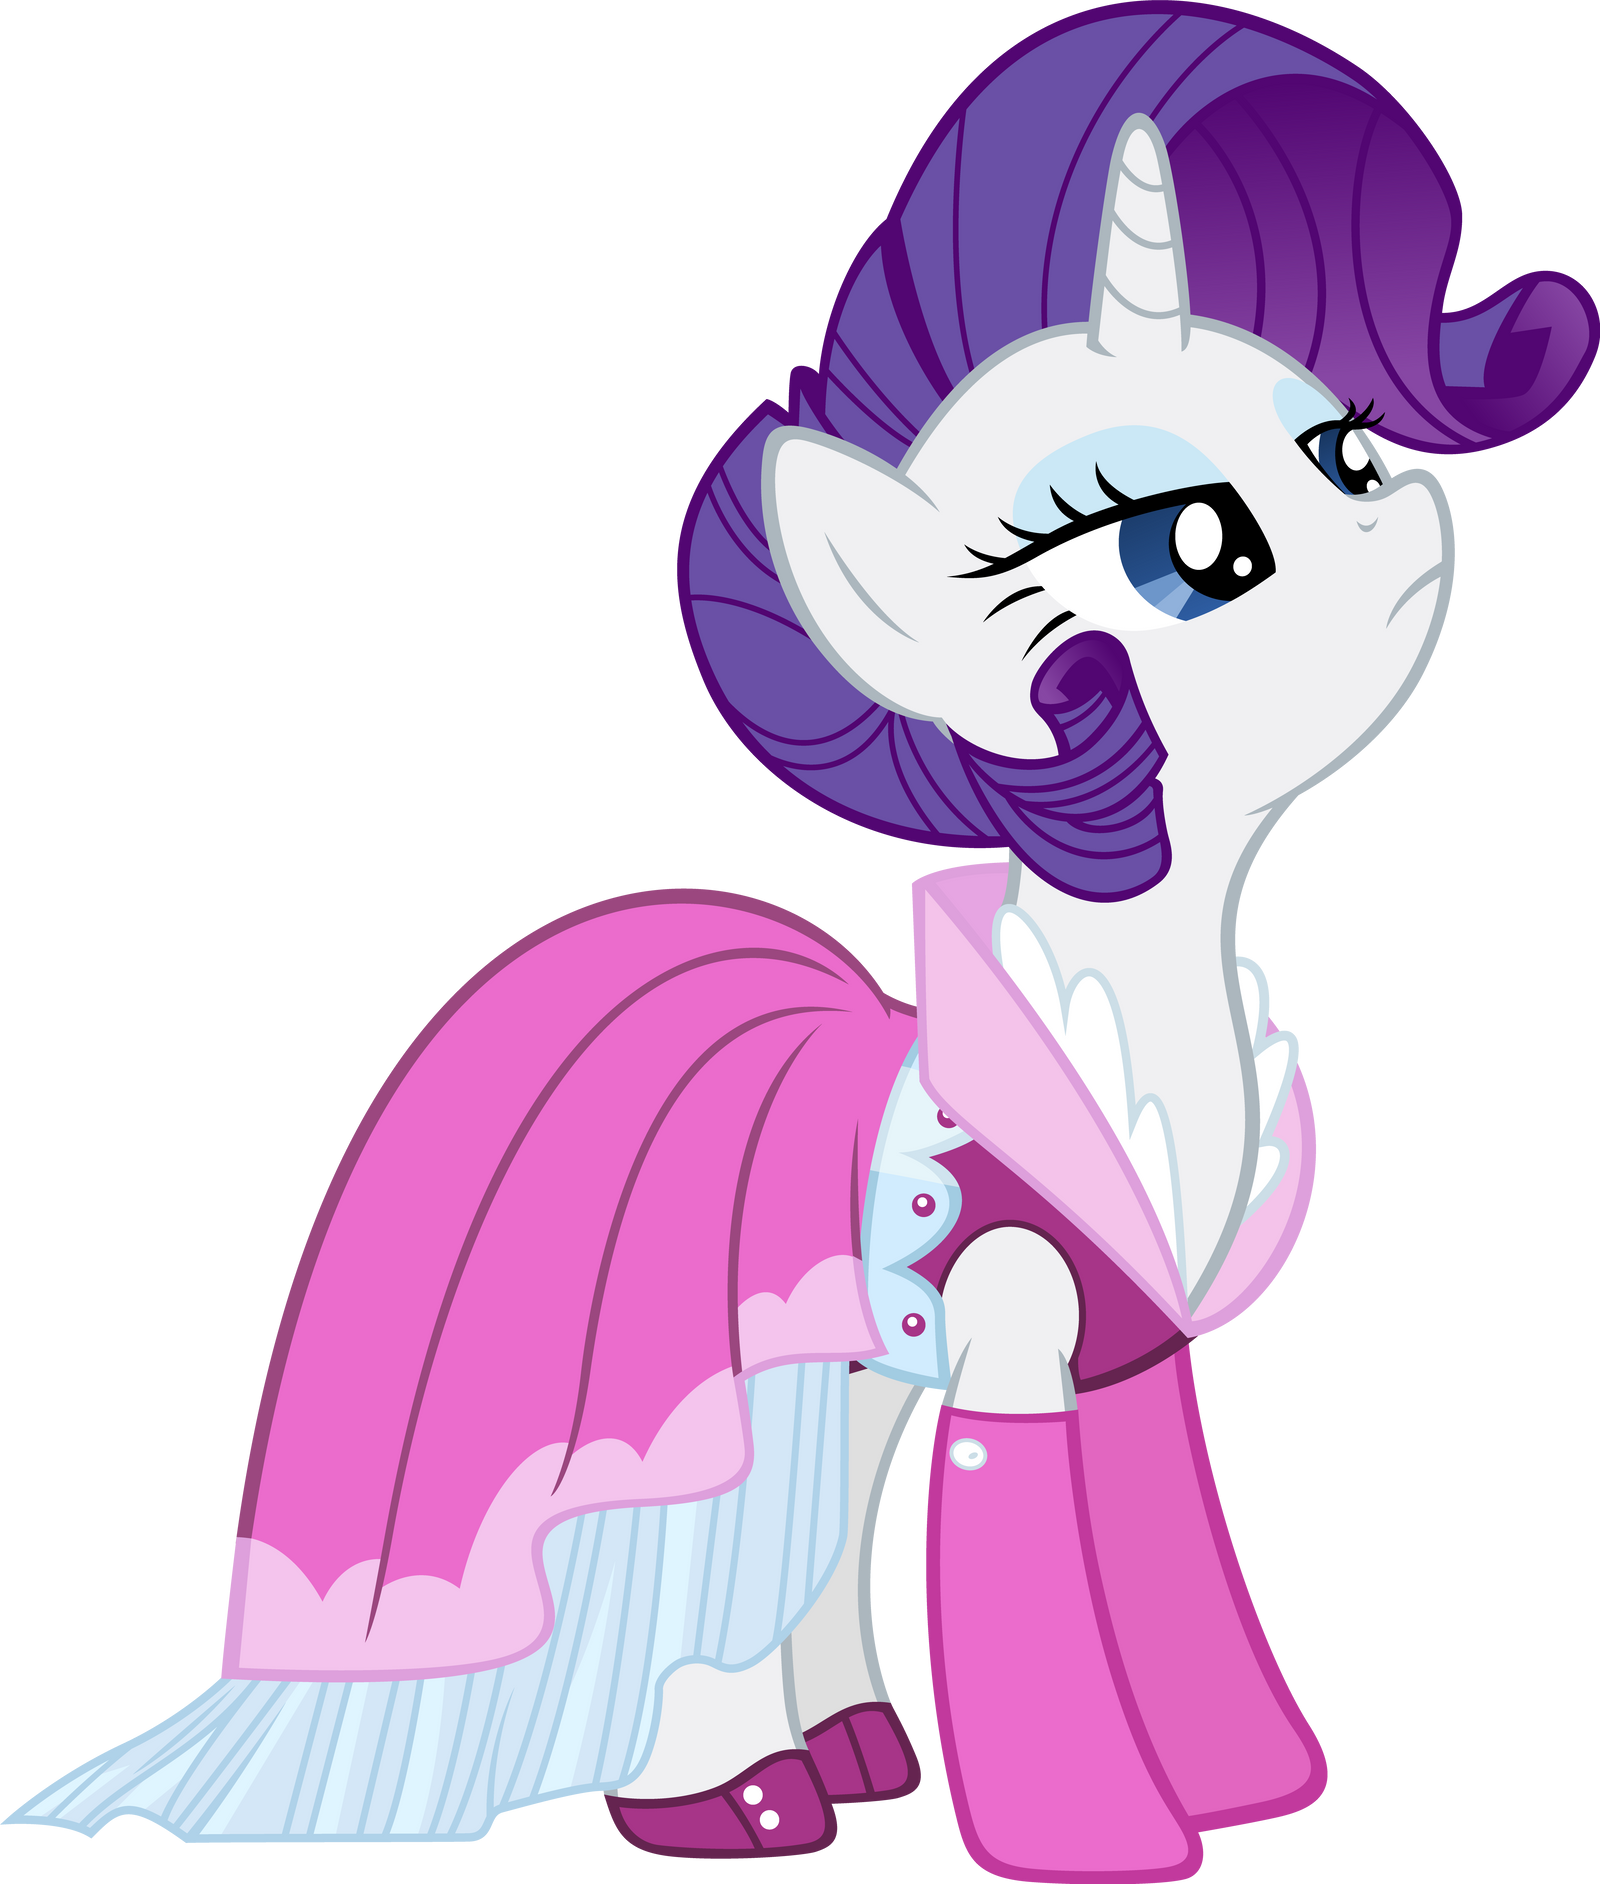 rarity___snobbish_by_ocarina0ftimelord-d5lcja2.png